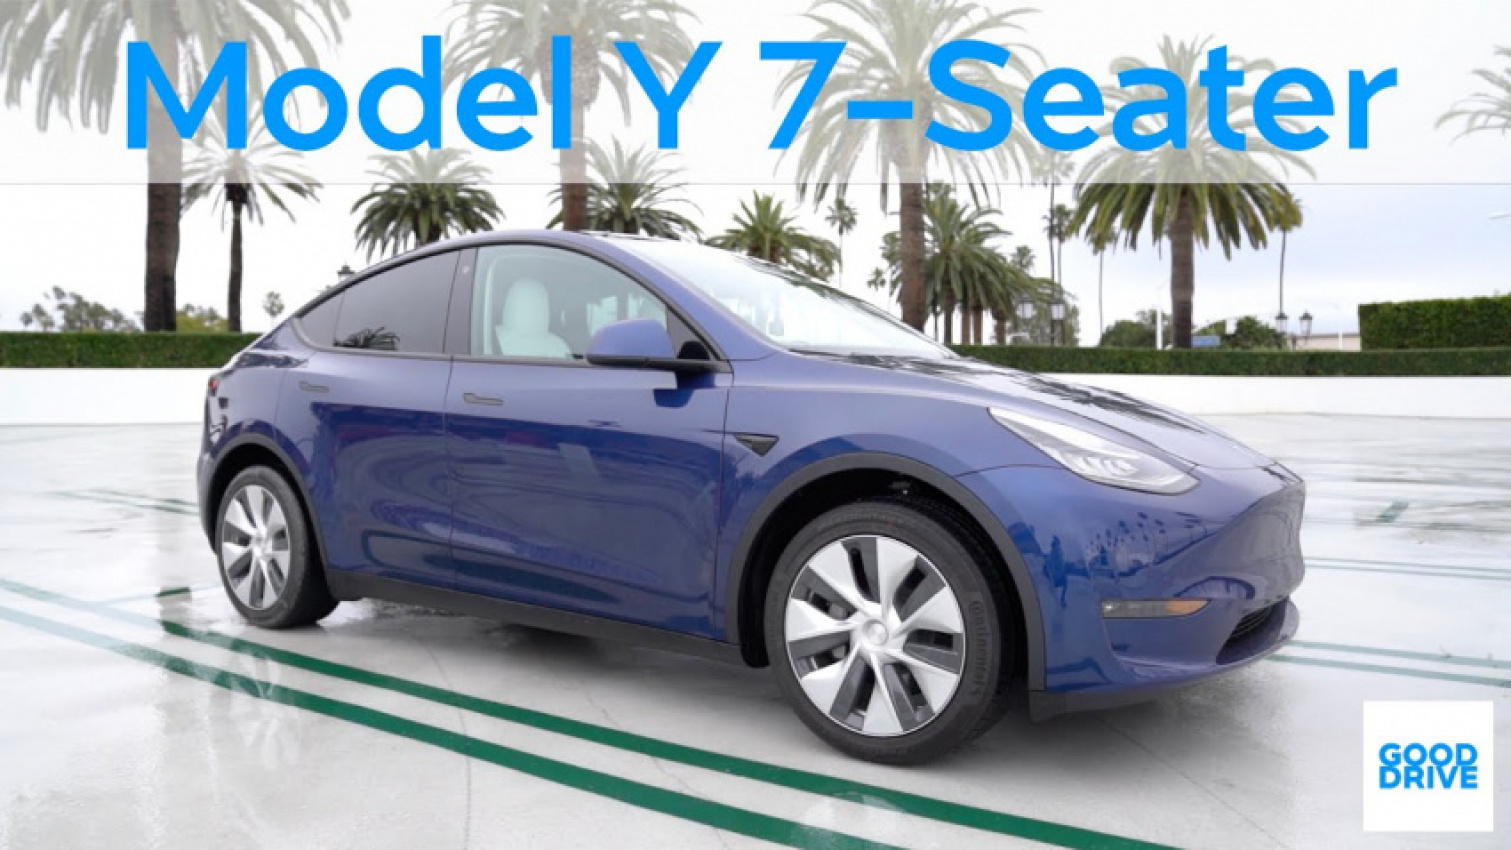 autos, cars, tesla, model y, tesla family model, tesla model y, tesla model y 7 seat availability, tesla model y 7 seater, tesla model y 7 seater 2020, tesla model y 7 seater delivery, tesla model y 7 seater interior, tesla model y 7 seater pictures, tesla model y 7 seater price, tesla model y 7 seater release date, tesla model y 7 seater review, tesla model y 7 seater review – test drive, interior, and trunk comparison